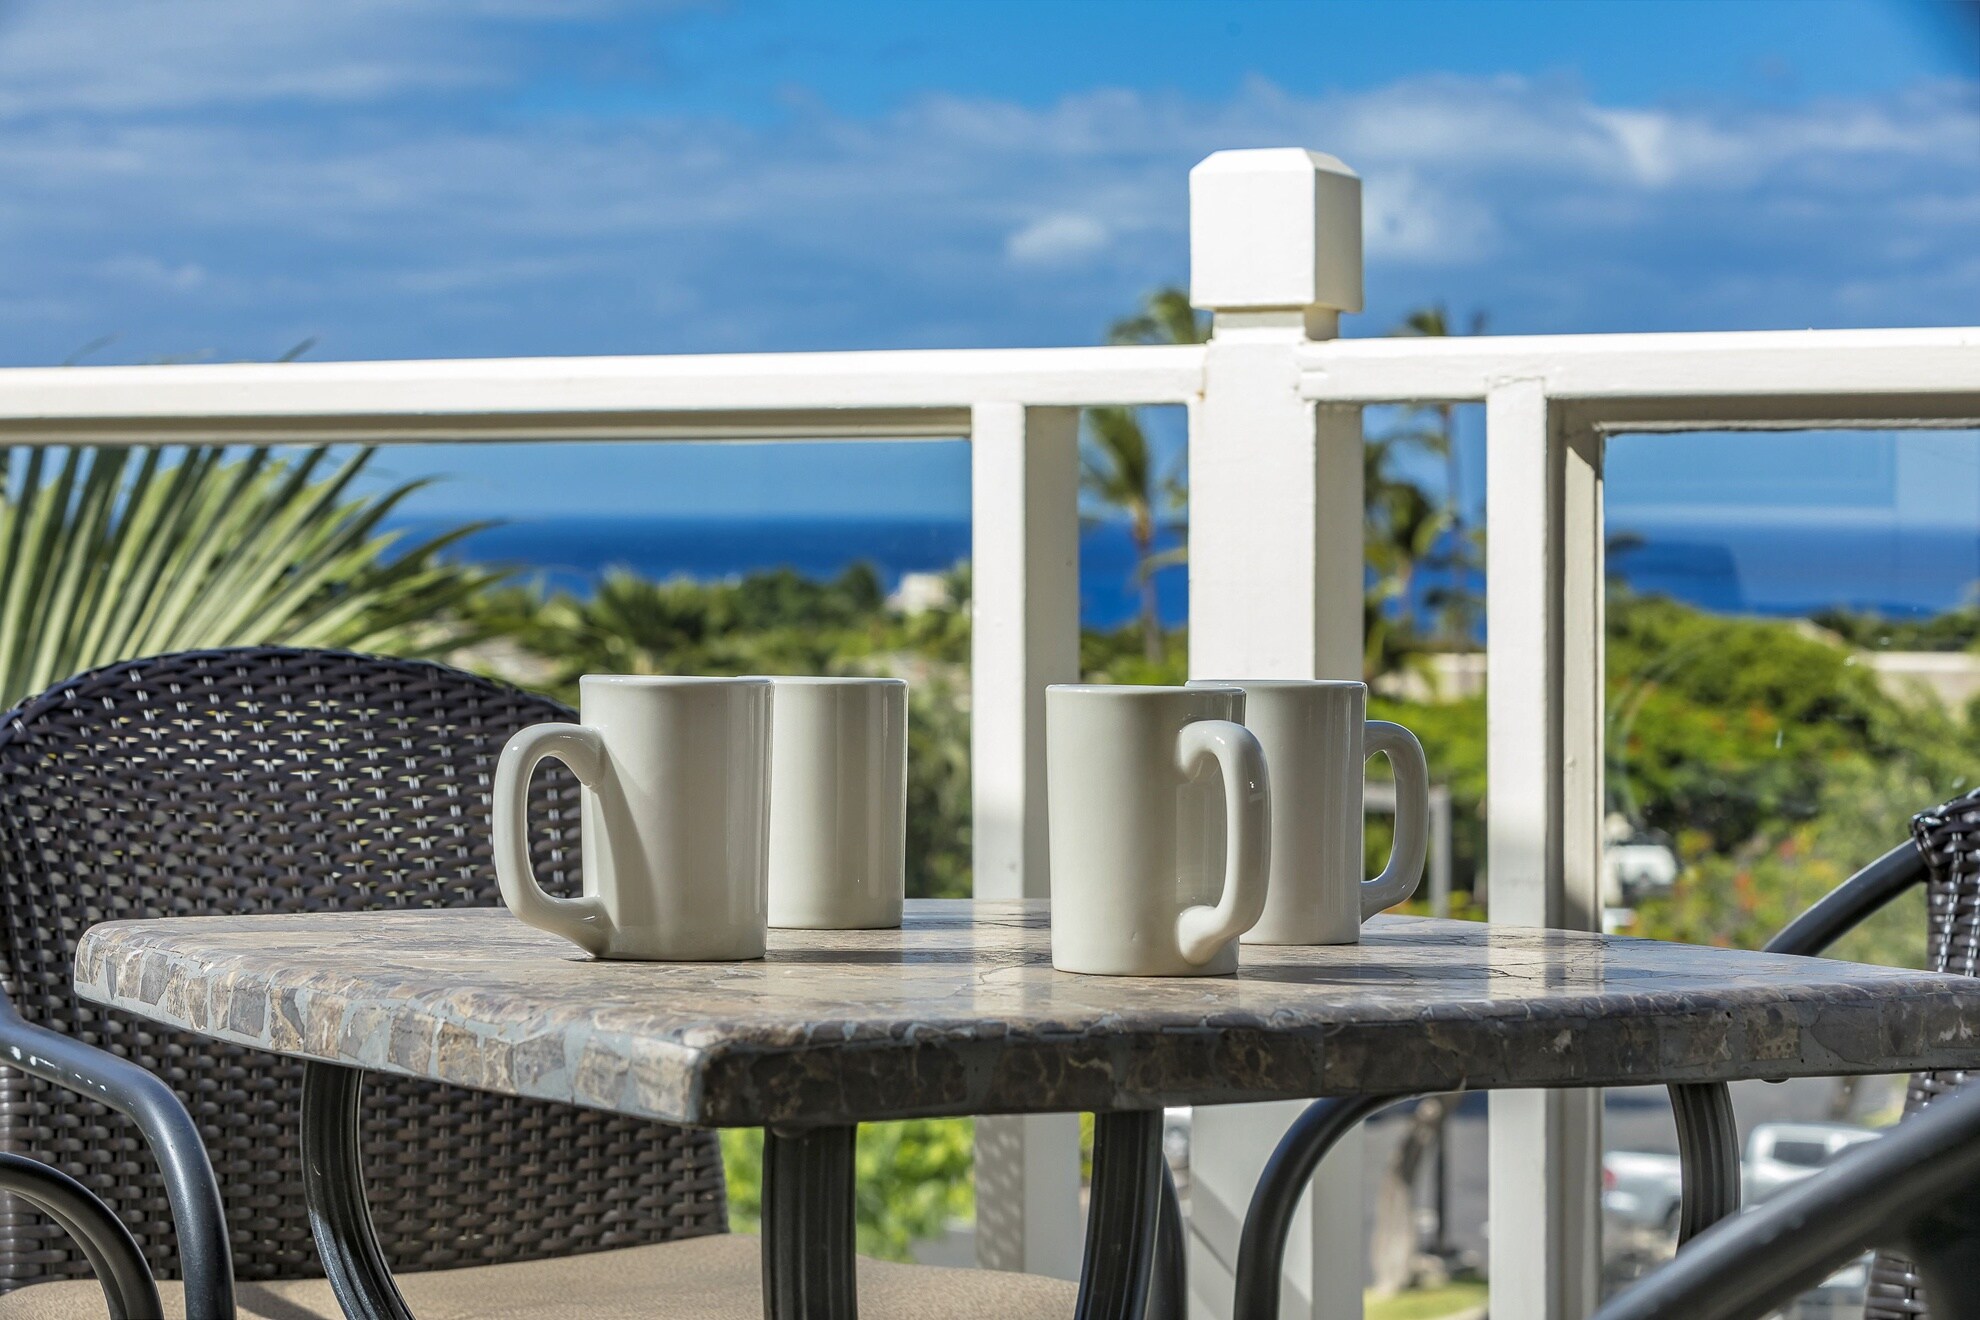 Coffee in the morning on your lanai!